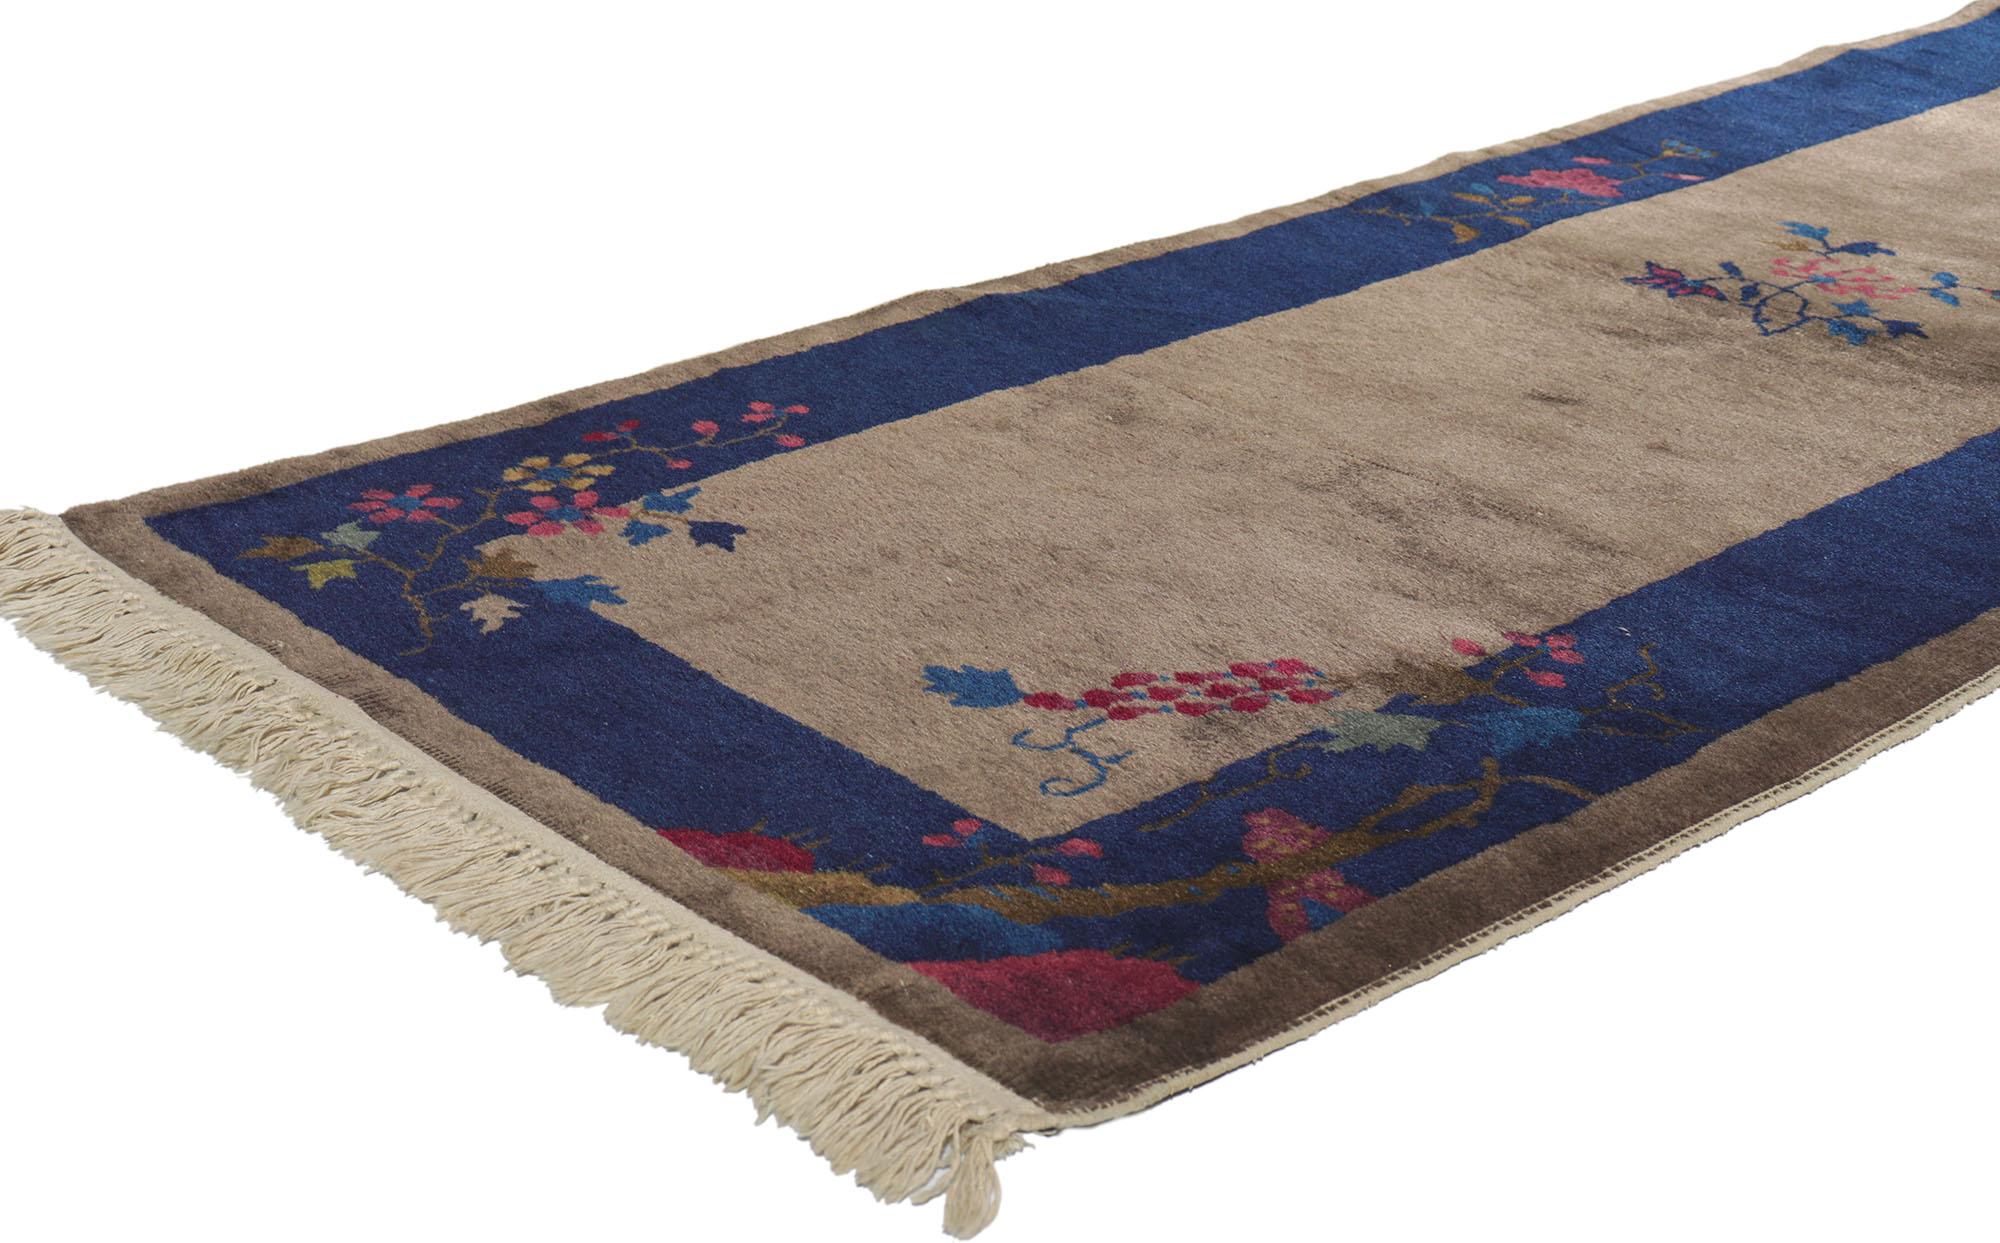 78200 Antique Chinese Peking runner, 02'07 x 14'04.


Perfect for a hallway, long entry, grand foyer, designer entryway, galley kitchen, corridor, long stair landing, grand parlor, home office, private library, conservatory, wine cellar,